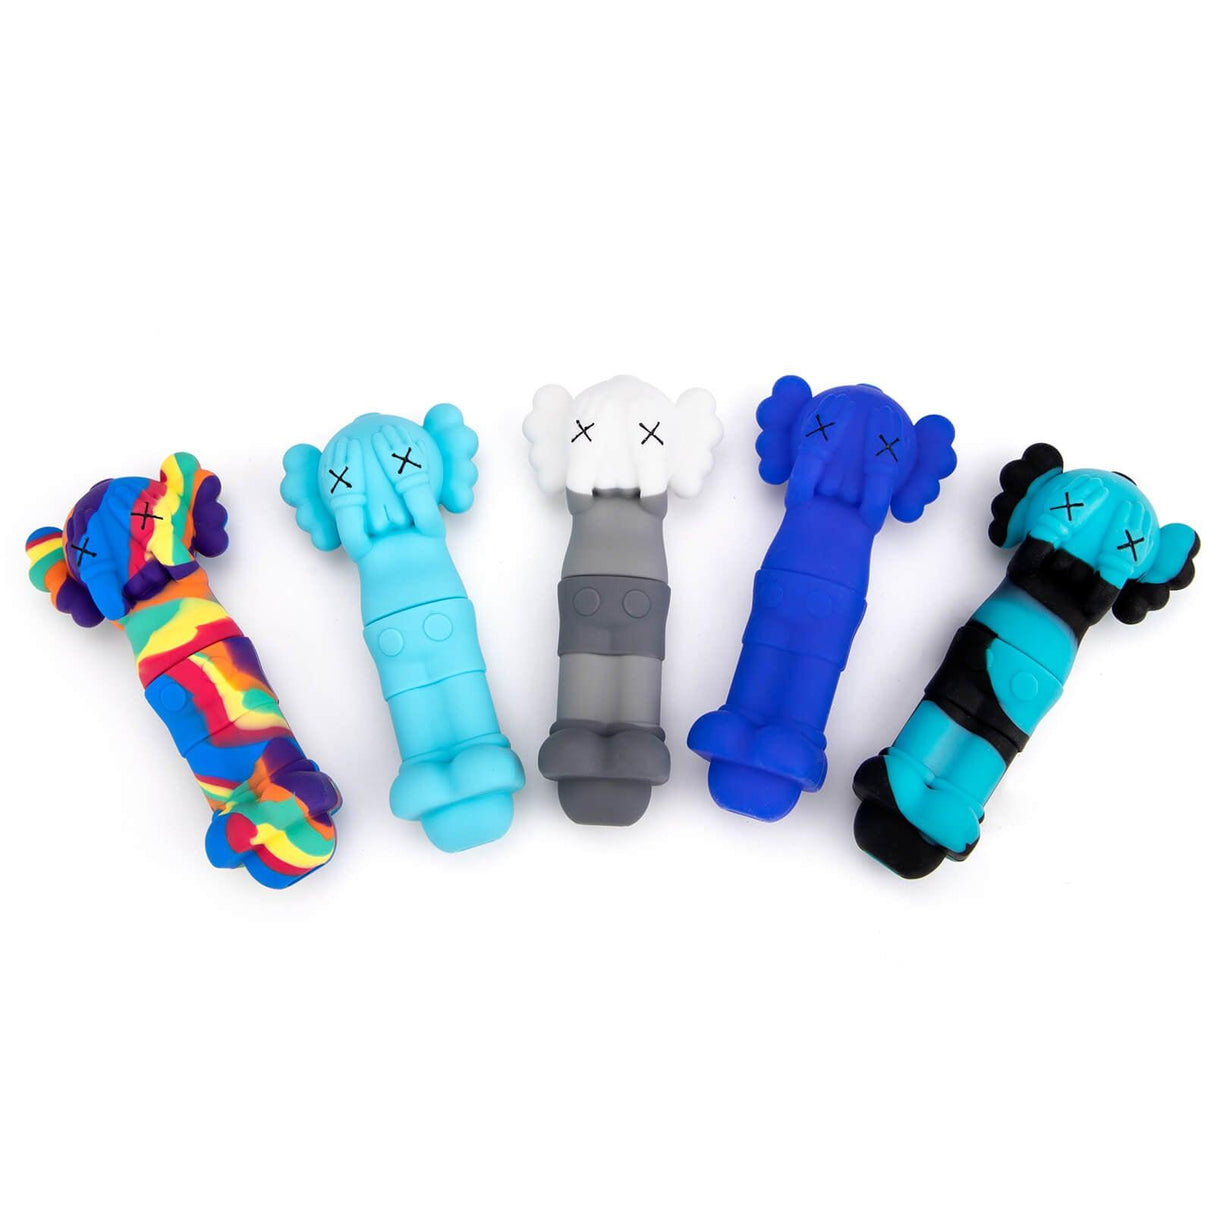 PILOTDIARY Kaws Silicone Pipes in multiple colors displayed side by side on a white background